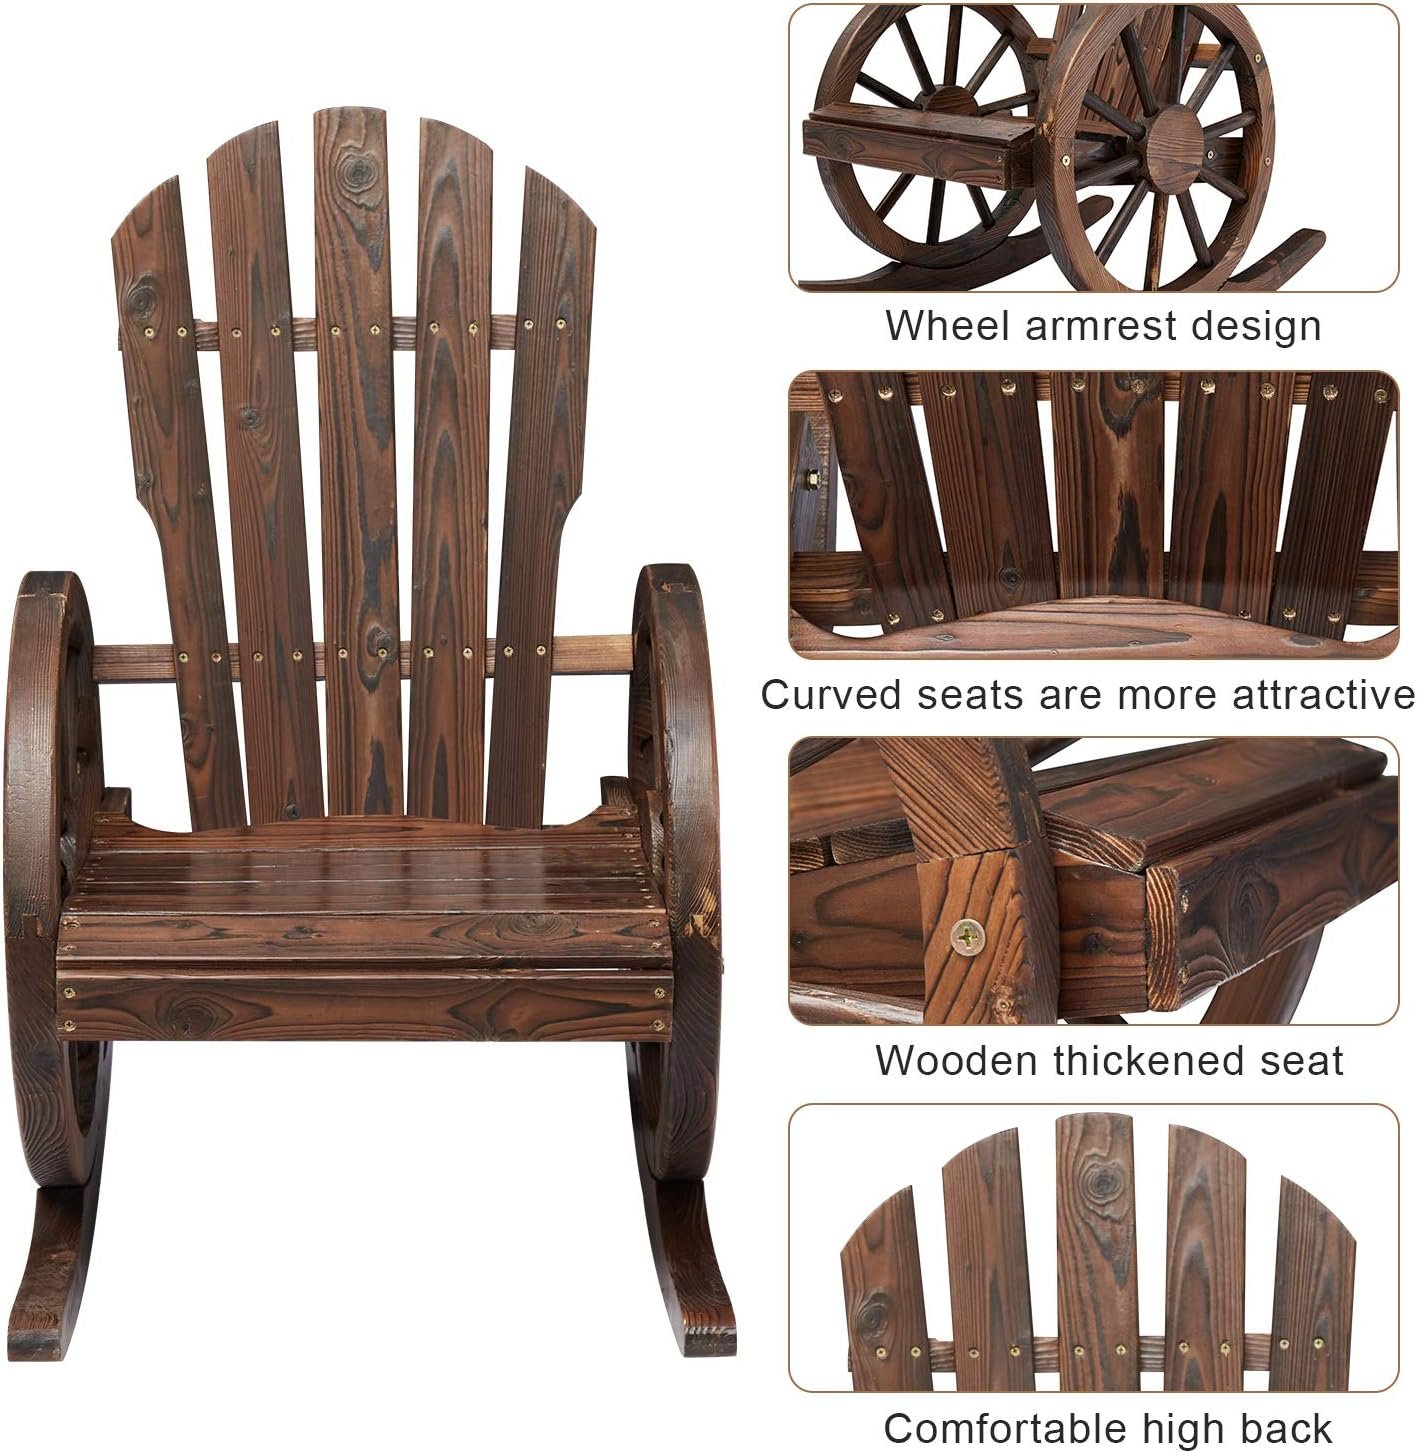 Kinsuite Outdoor Wood Wagon Rocking Chair with Wheel Armrest for Patio Garden Country Yard, Fir Wooden